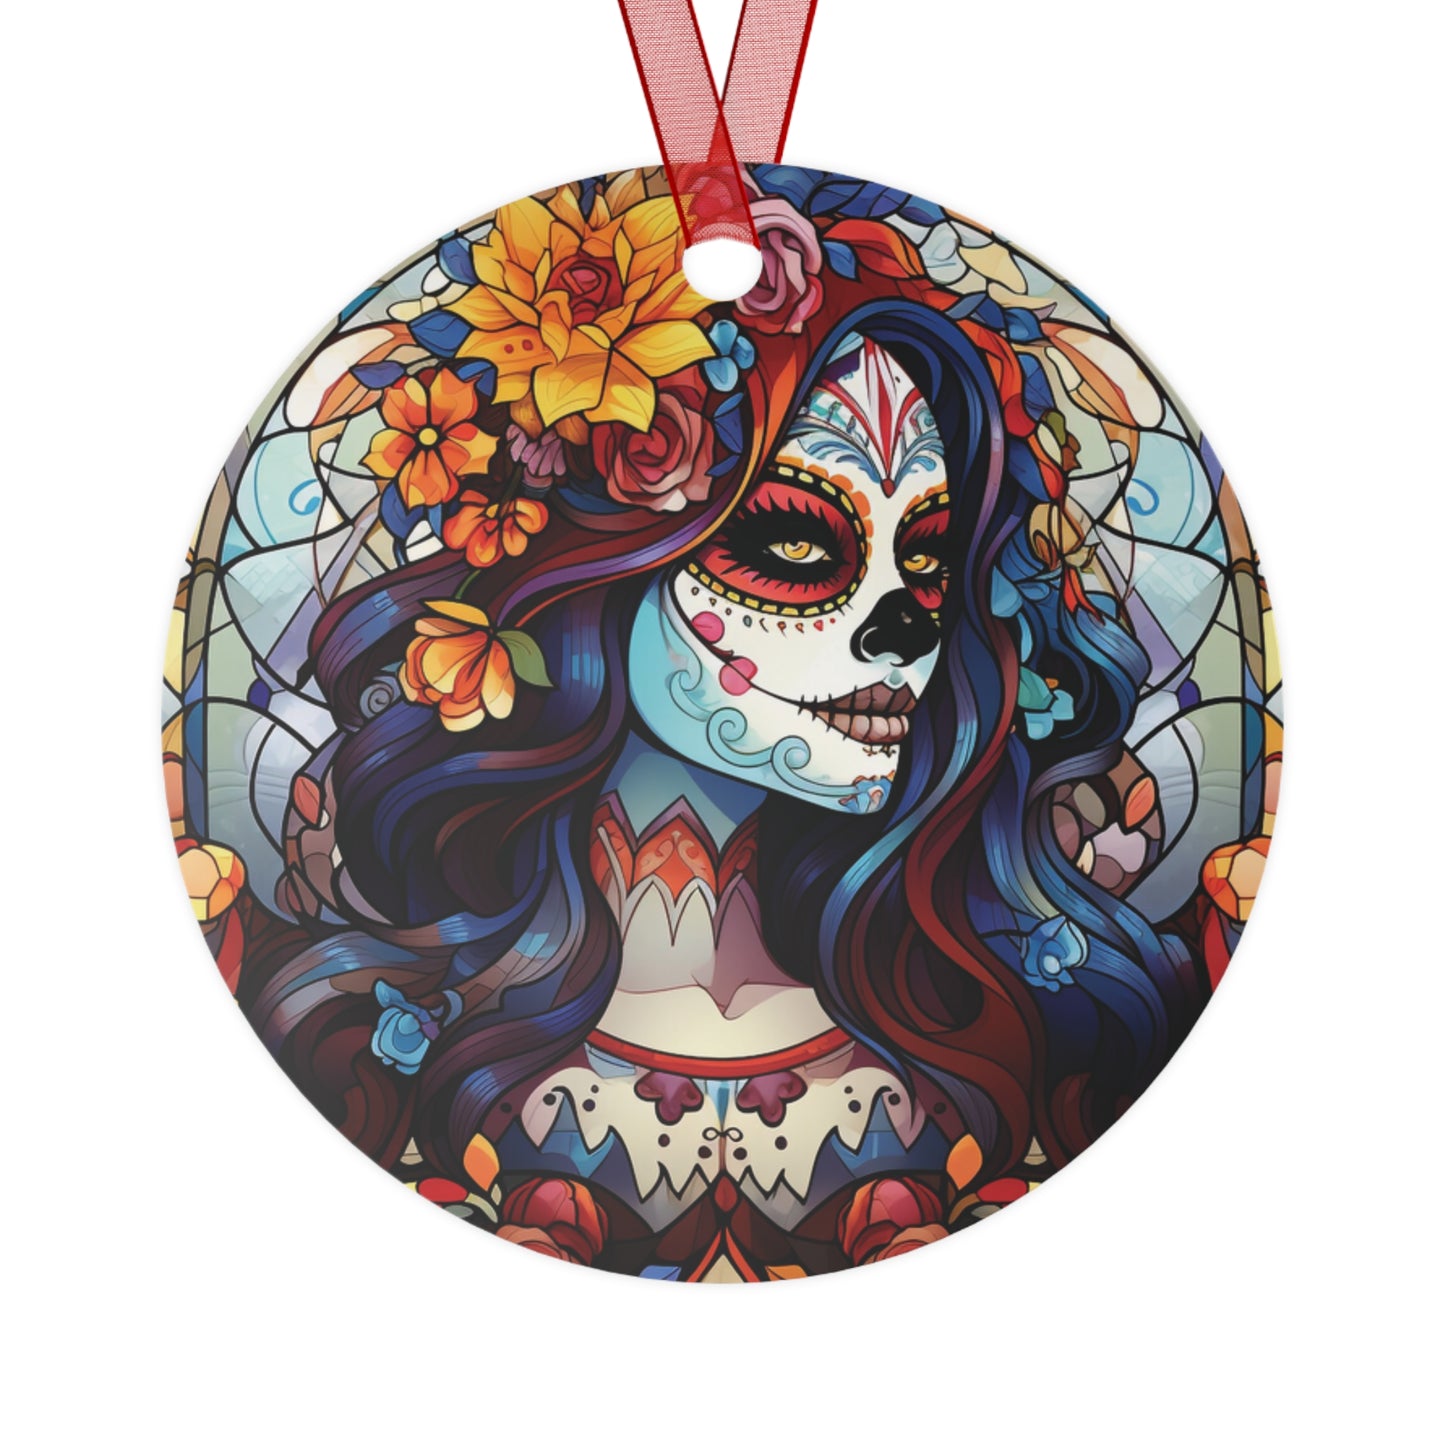 Dia De Los Muertos Stained Glass Style Ornament Lightweight Shaterproof Metal Ornaments Christmas Ornament Exchange Christmas Dead Ornament